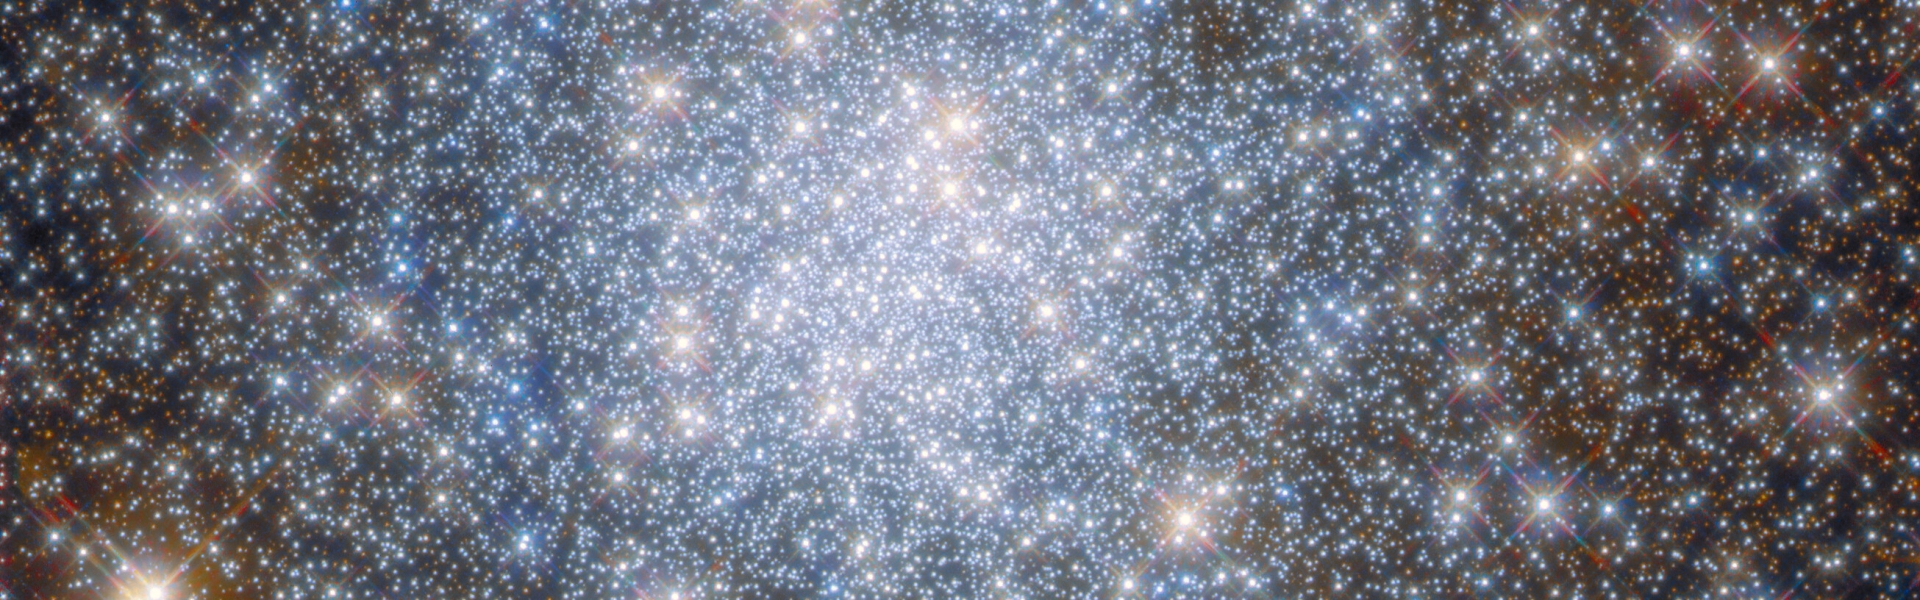 Globular cluster NGC 6638 in the constellation Sagittarius, as seen by the Hubble Space Telescope